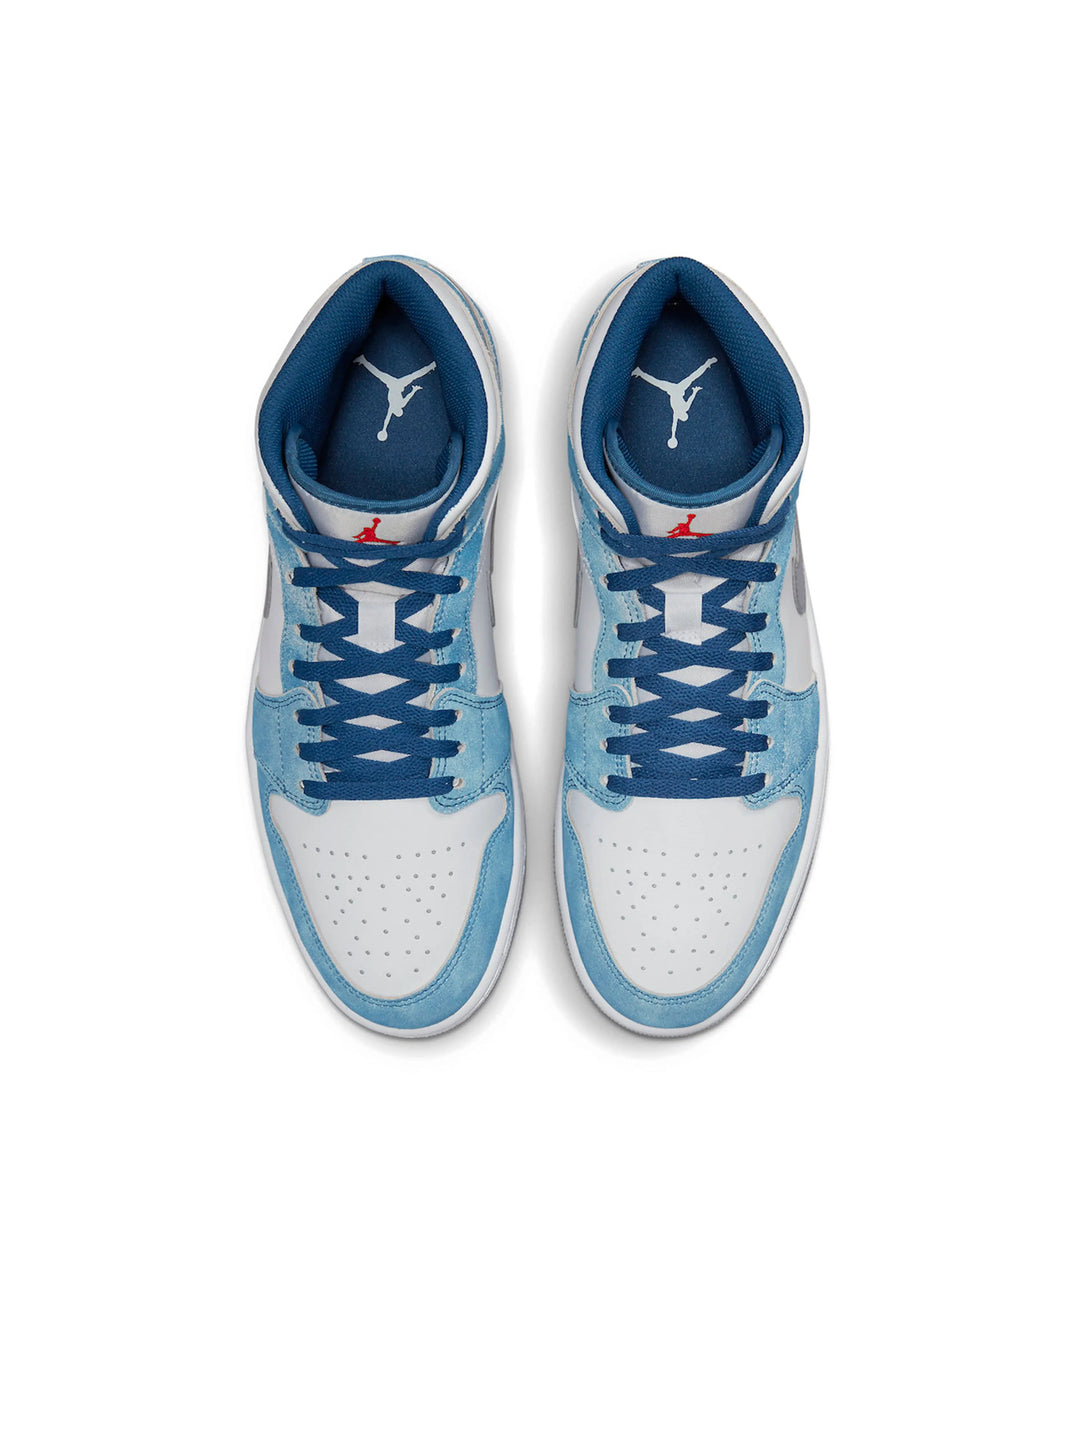 Nike Air Jordan 1 Mid French Blue Fire Red Prior